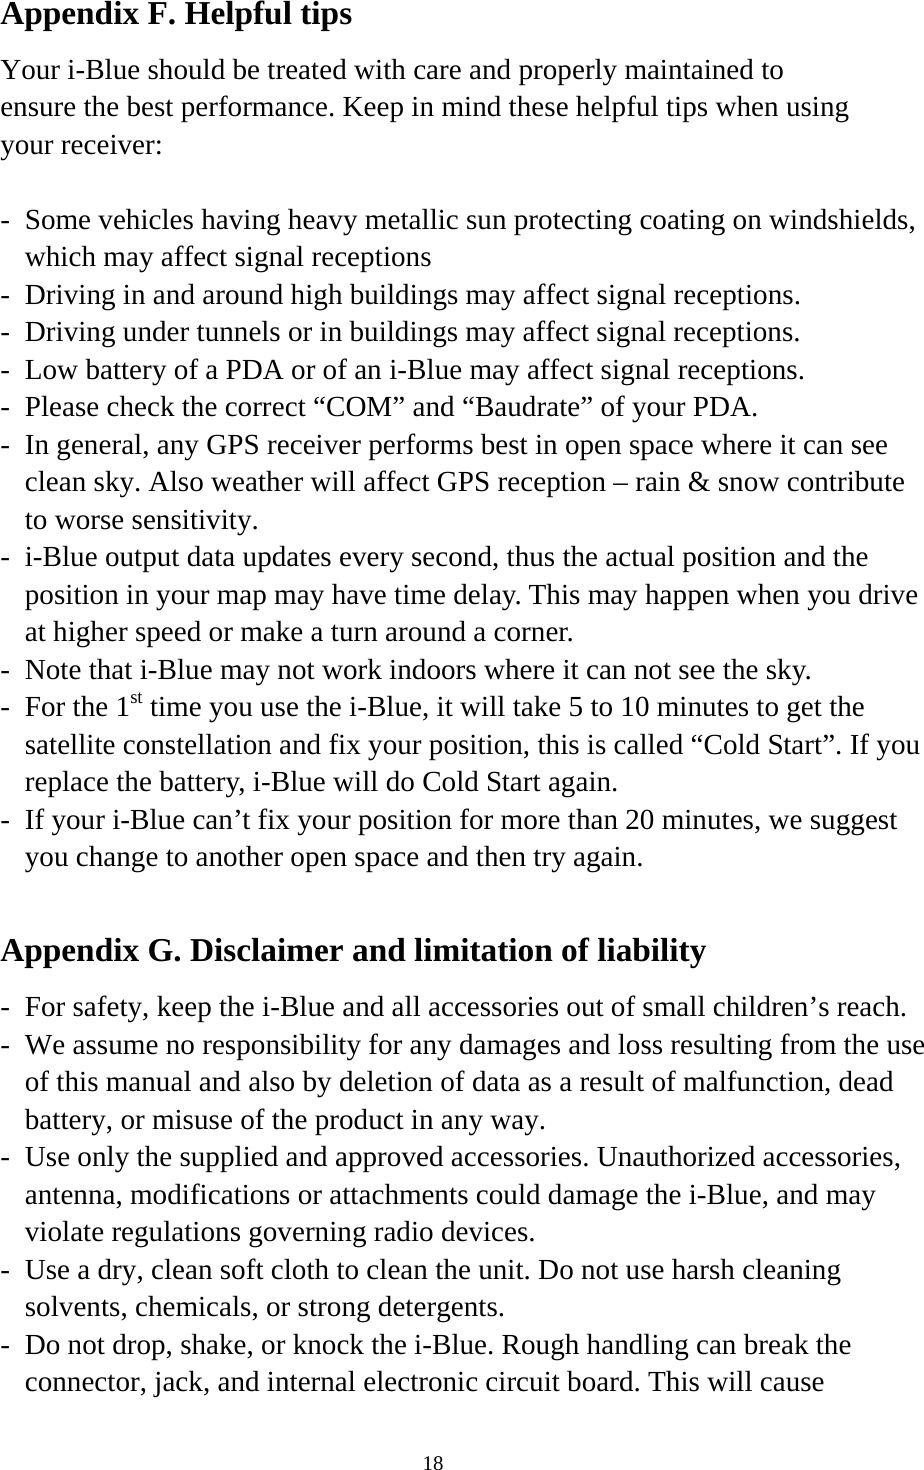  18Appendix F. Helpful tips Your i-Blue should be treated with care and properly maintained to ensure the best performance. Keep in mind these helpful tips when using your receiver:  -  Some vehicles having heavy metallic sun protecting coating on windshields, which may affect signal receptions -  Driving in and around high buildings may affect signal receptions. -  Driving under tunnels or in buildings may affect signal receptions. -  Low battery of a PDA or of an i-Blue may affect signal receptions. -  Please check the correct “COM” and “Baudrate” of your PDA. -  In general, any GPS receiver performs best in open space where it can see clean sky. Also weather will affect GPS reception – rain &amp; snow contribute to worse sensitivity. -  i-Blue output data updates every second, thus the actual position and the position in your map may have time delay. This may happen when you drive at higher speed or make a turn around a corner. -  Note that i-Blue may not work indoors where it can not see the sky. -  For the 1st time you use the i-Blue, it will take 5 to 10 minutes to get the satellite constellation and fix your position, this is called “Cold Start”. If you replace the battery, i-Blue will do Cold Start again. -  If your i-Blue can’t fix your position for more than 20 minutes, we suggest you change to another open space and then try again.  Appendix G. Disclaimer and limitation of liability -  For safety, keep the i-Blue and all accessories out of small children’s reach. -  We assume no responsibility for any damages and loss resulting from the use of this manual and also by deletion of data as a result of malfunction, dead battery, or misuse of the product in any way. -  Use only the supplied and approved accessories. Unauthorized accessories, antenna, modifications or attachments could damage the i-Blue, and may violate regulations governing radio devices. -  Use a dry, clean soft cloth to clean the unit. Do not use harsh cleaning solvents, chemicals, or strong detergents. -  Do not drop, shake, or knock the i-Blue. Rough handling can break the connector, jack, and internal electronic circuit board. This will cause 